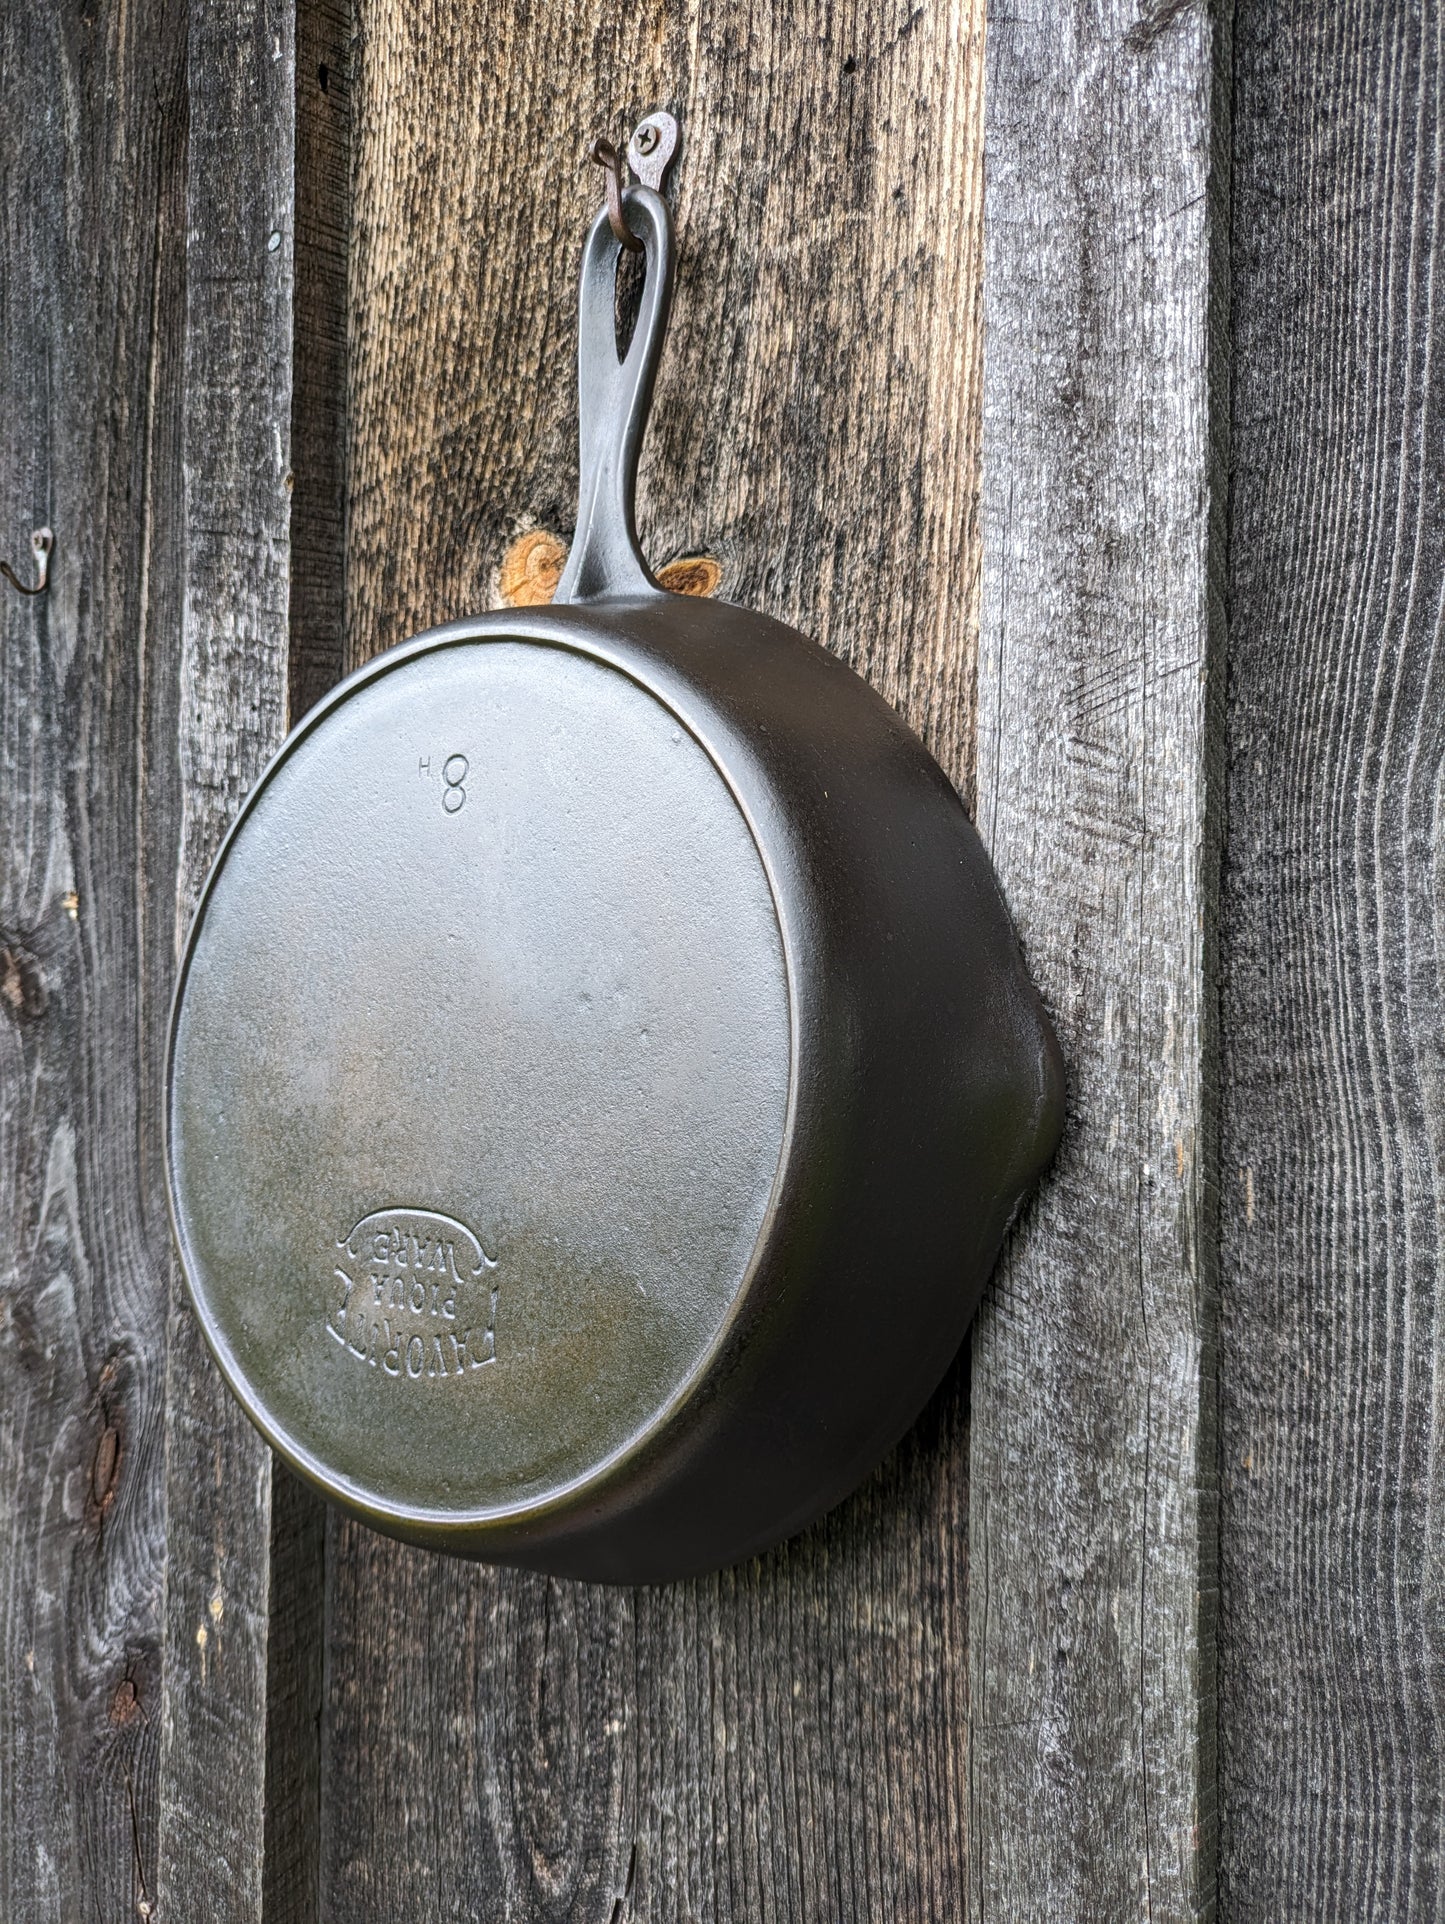 Favorite Piqua Ware #8 Cast Iron Skillet with Smiley Logo and Heat Ring